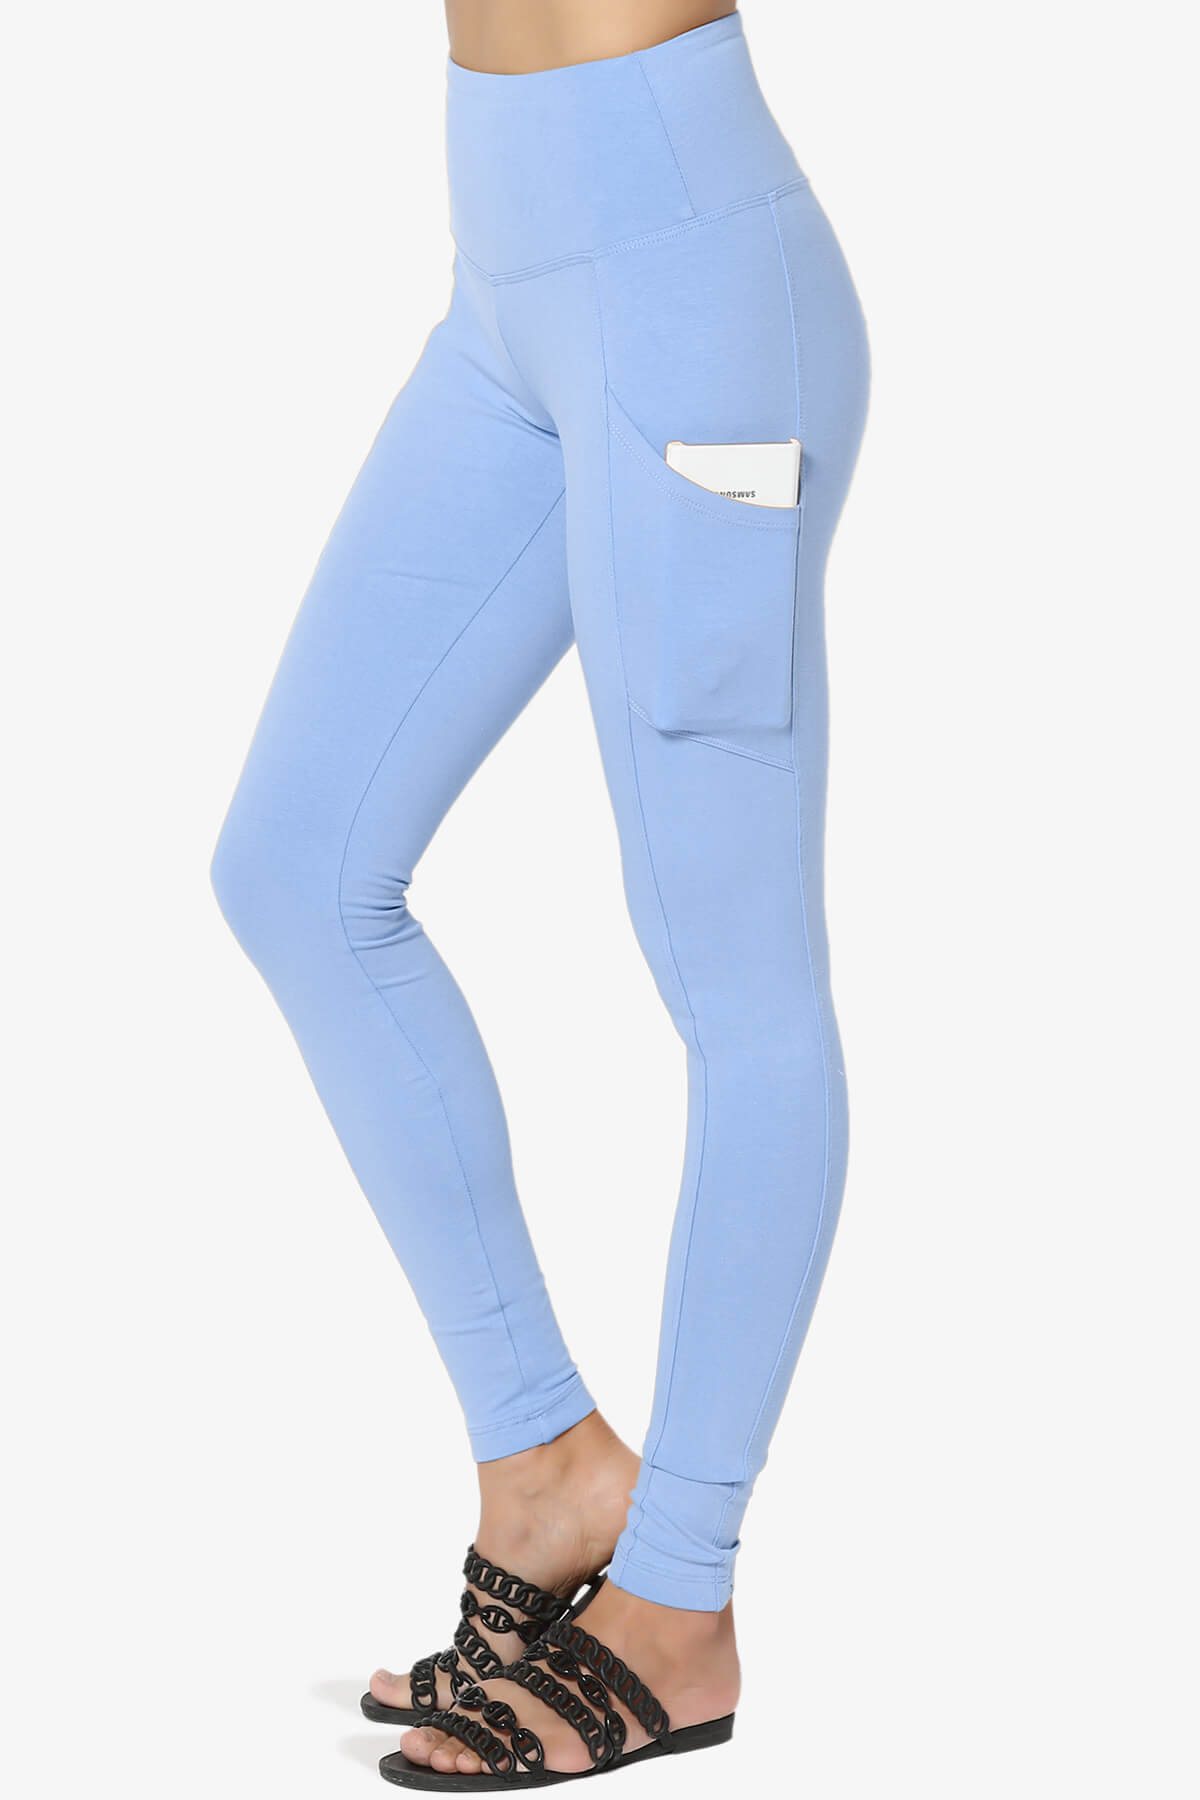 Ansley Luxe Cotton Leggings with Pockets LIGHT BLUE_1